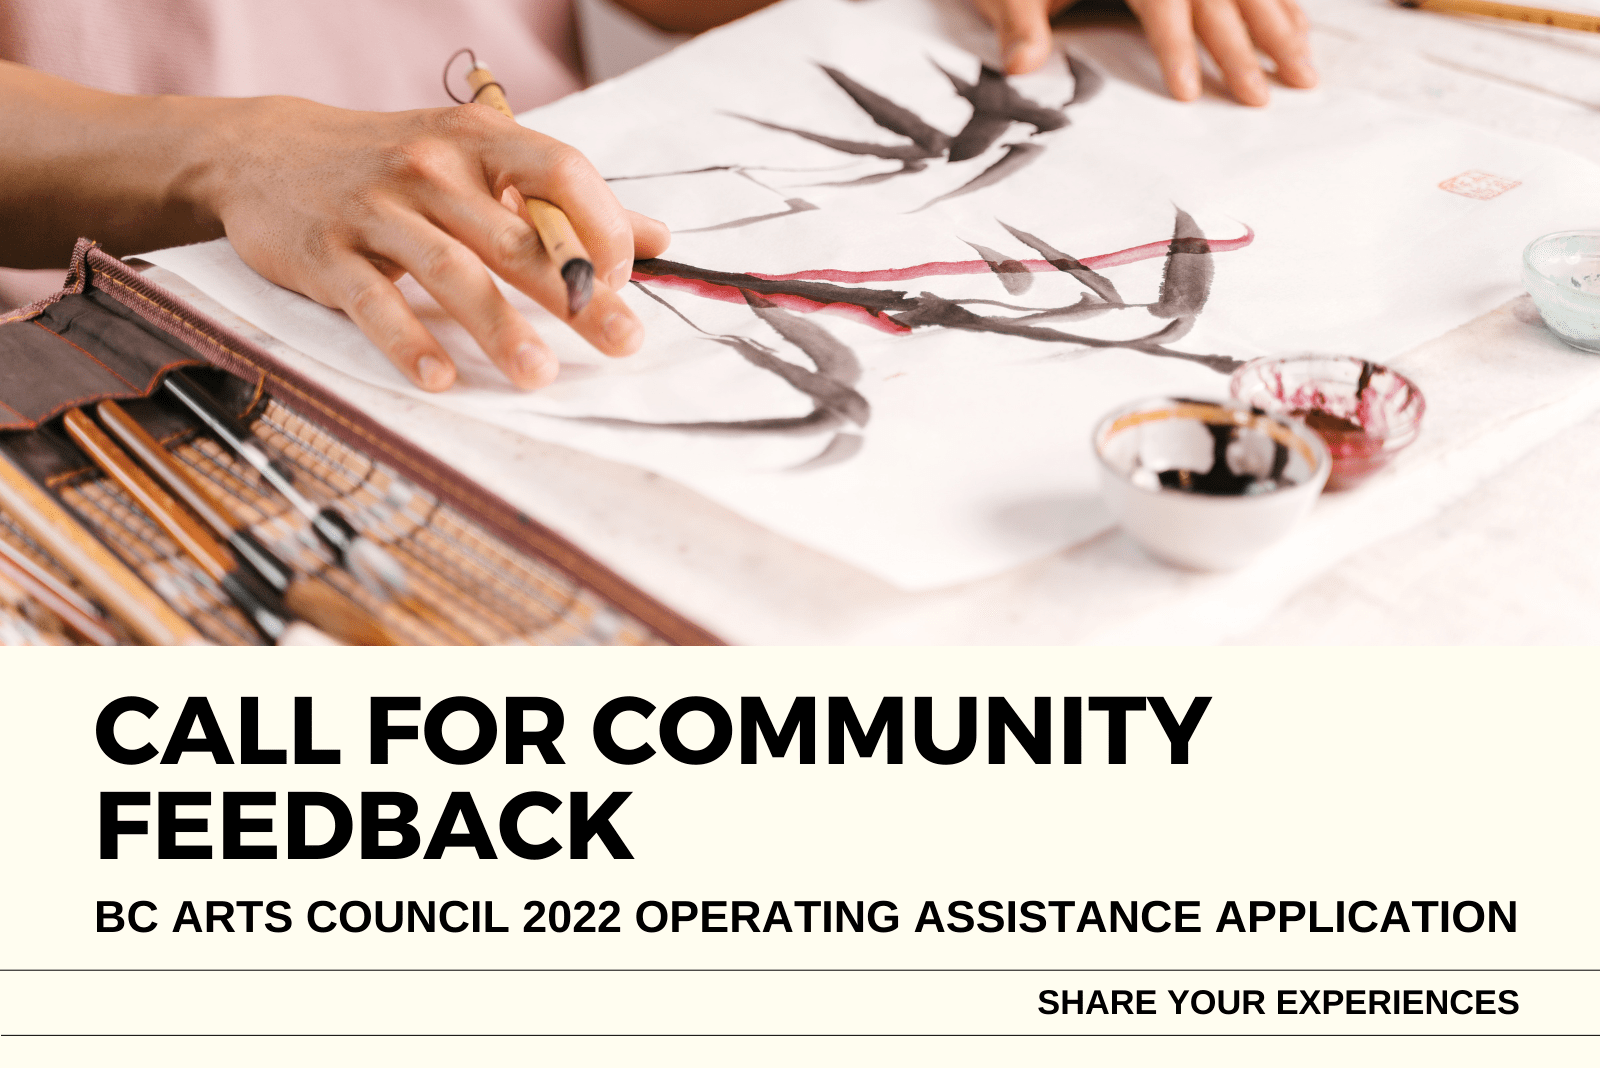 Call for Community Feedback: BC Arts Council 2022 Operating Assistance Application